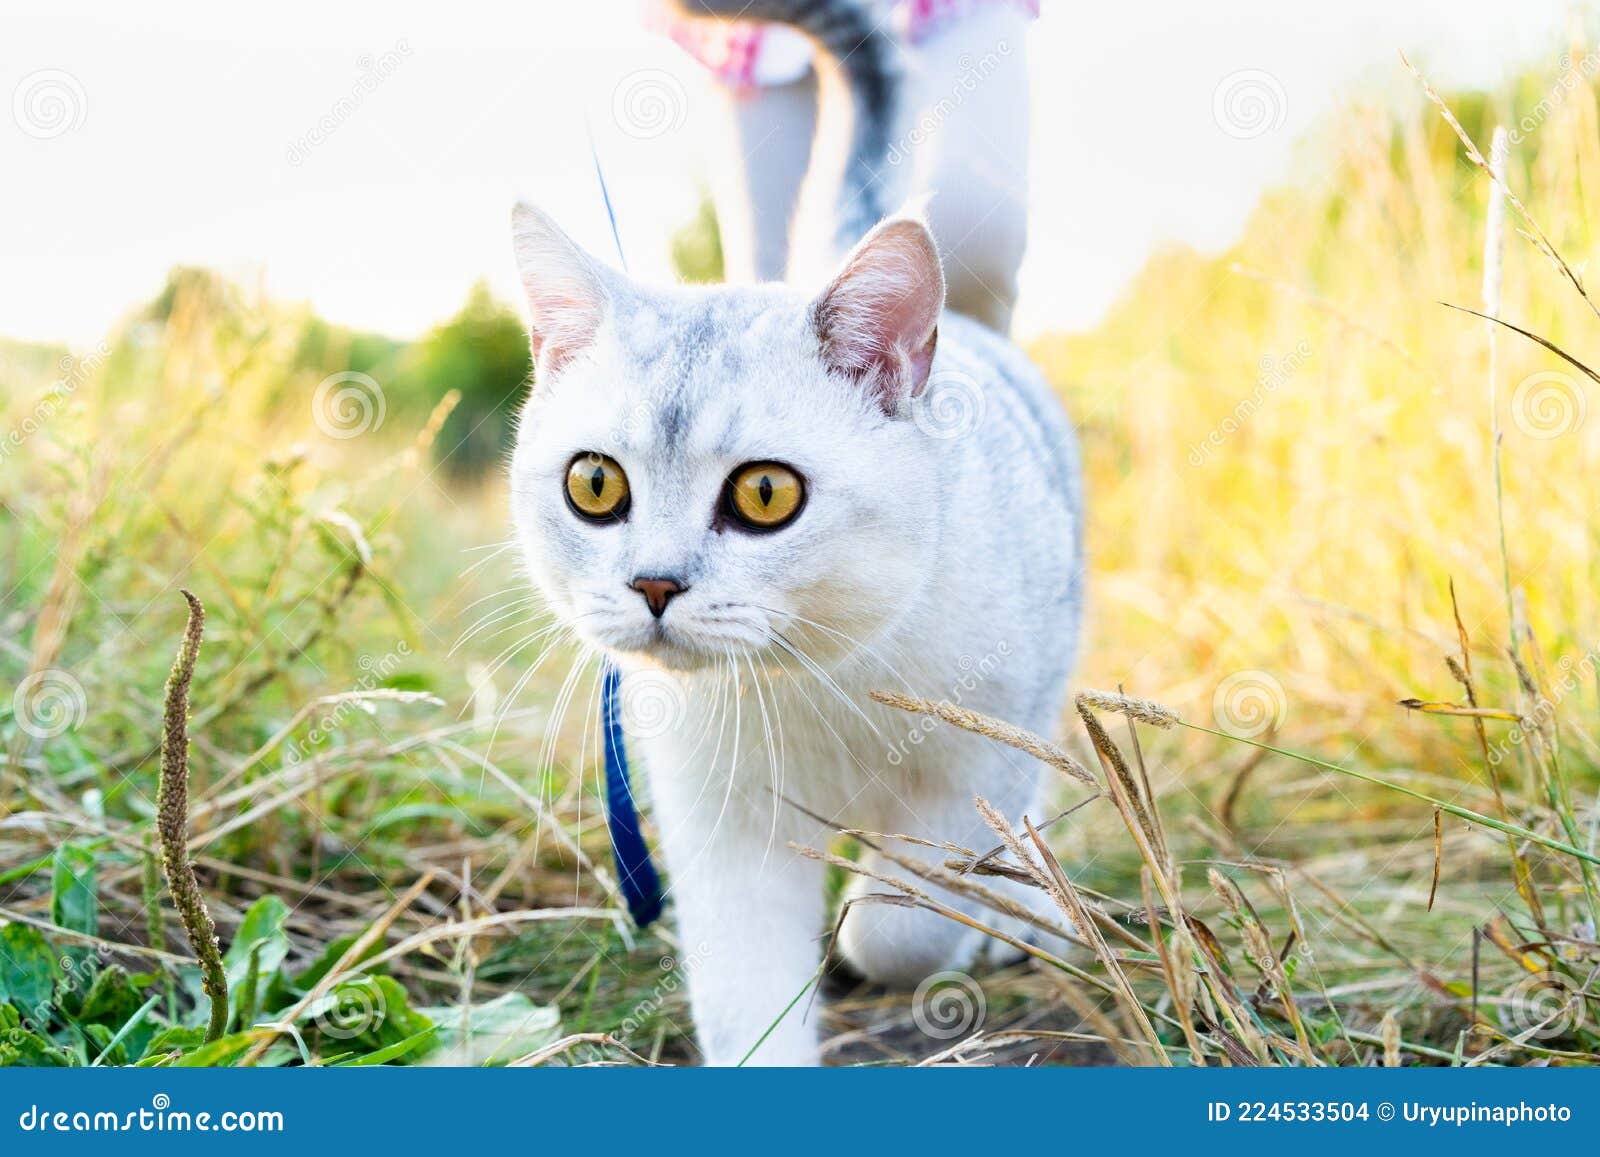 A Little Girl Walks a Big White Scottish Straight-eared Cat in Nature, Love  for Animals Stock Photo - Image of adventure, outdoor: 224533504